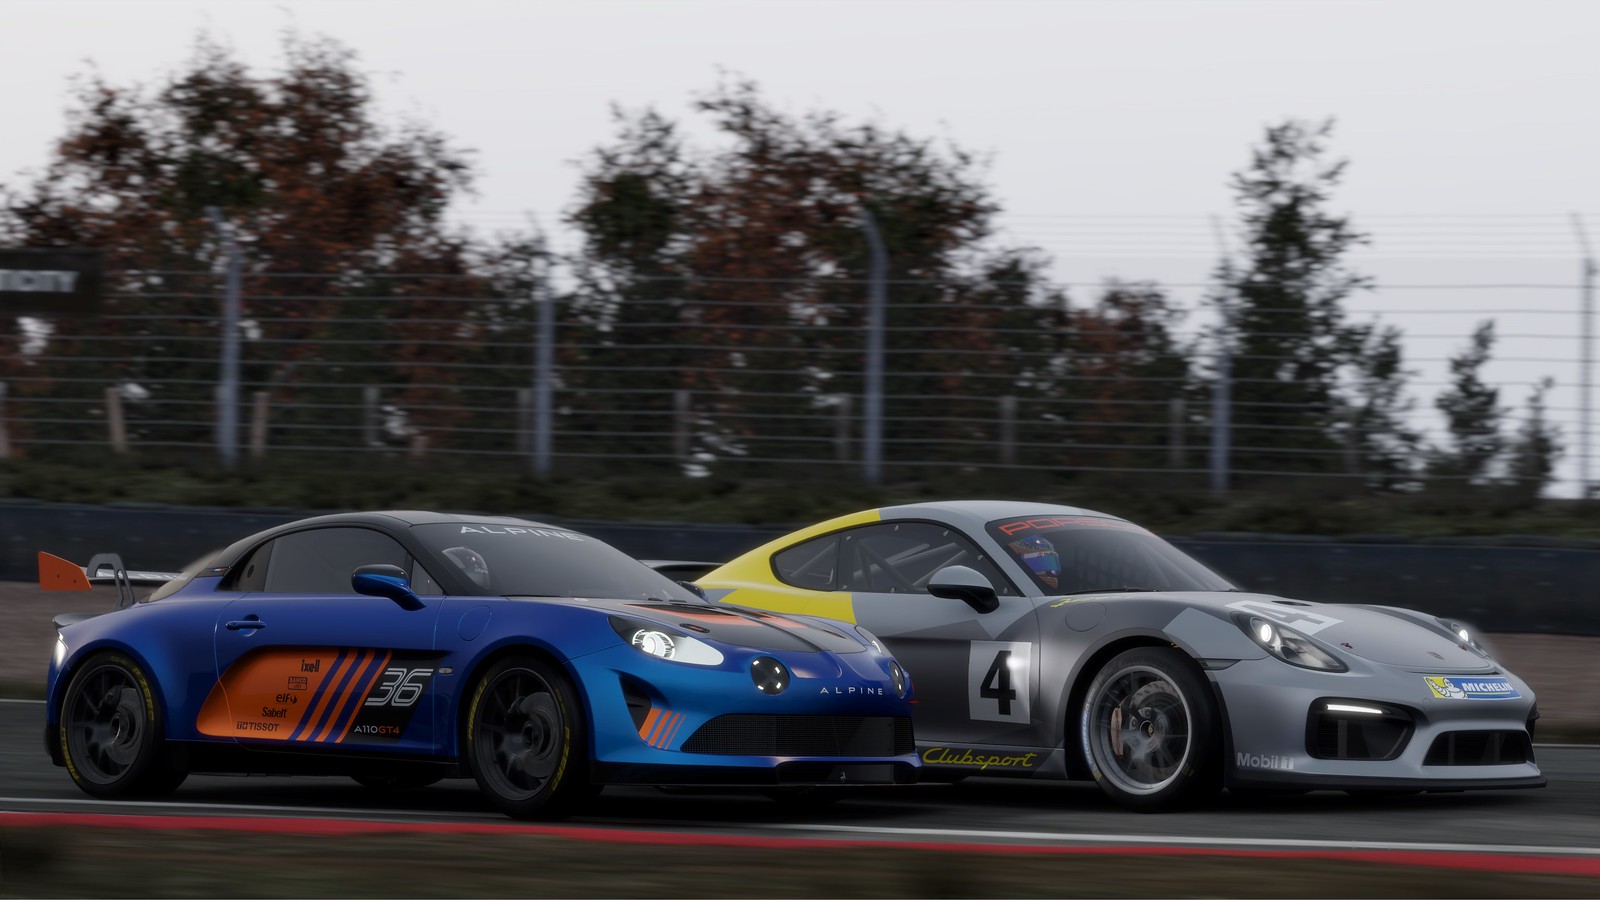 Creating a new player progression system for Project Cars 3